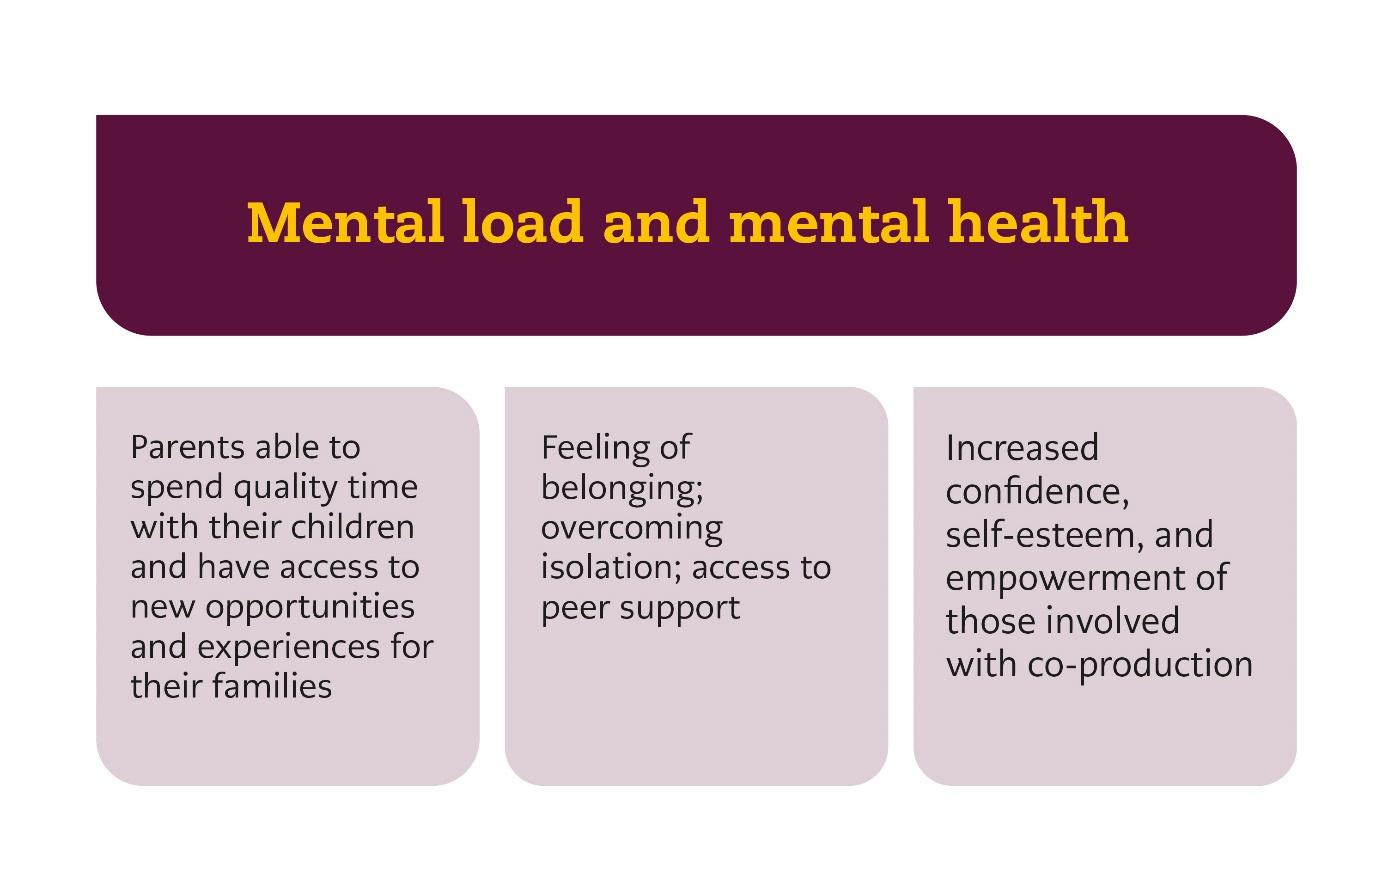 The image is an infographic describing the positive effects of coproduction on adverse effects on mental health caused by poverty. Mental load and mental health Parents able to spend quality time with their children and have access to new opportunities and experiences for their families Feeling of belonging; overcoming isolation; access to peer support Increased confidence, self-esteem, and empowerment of those involved with co-production 